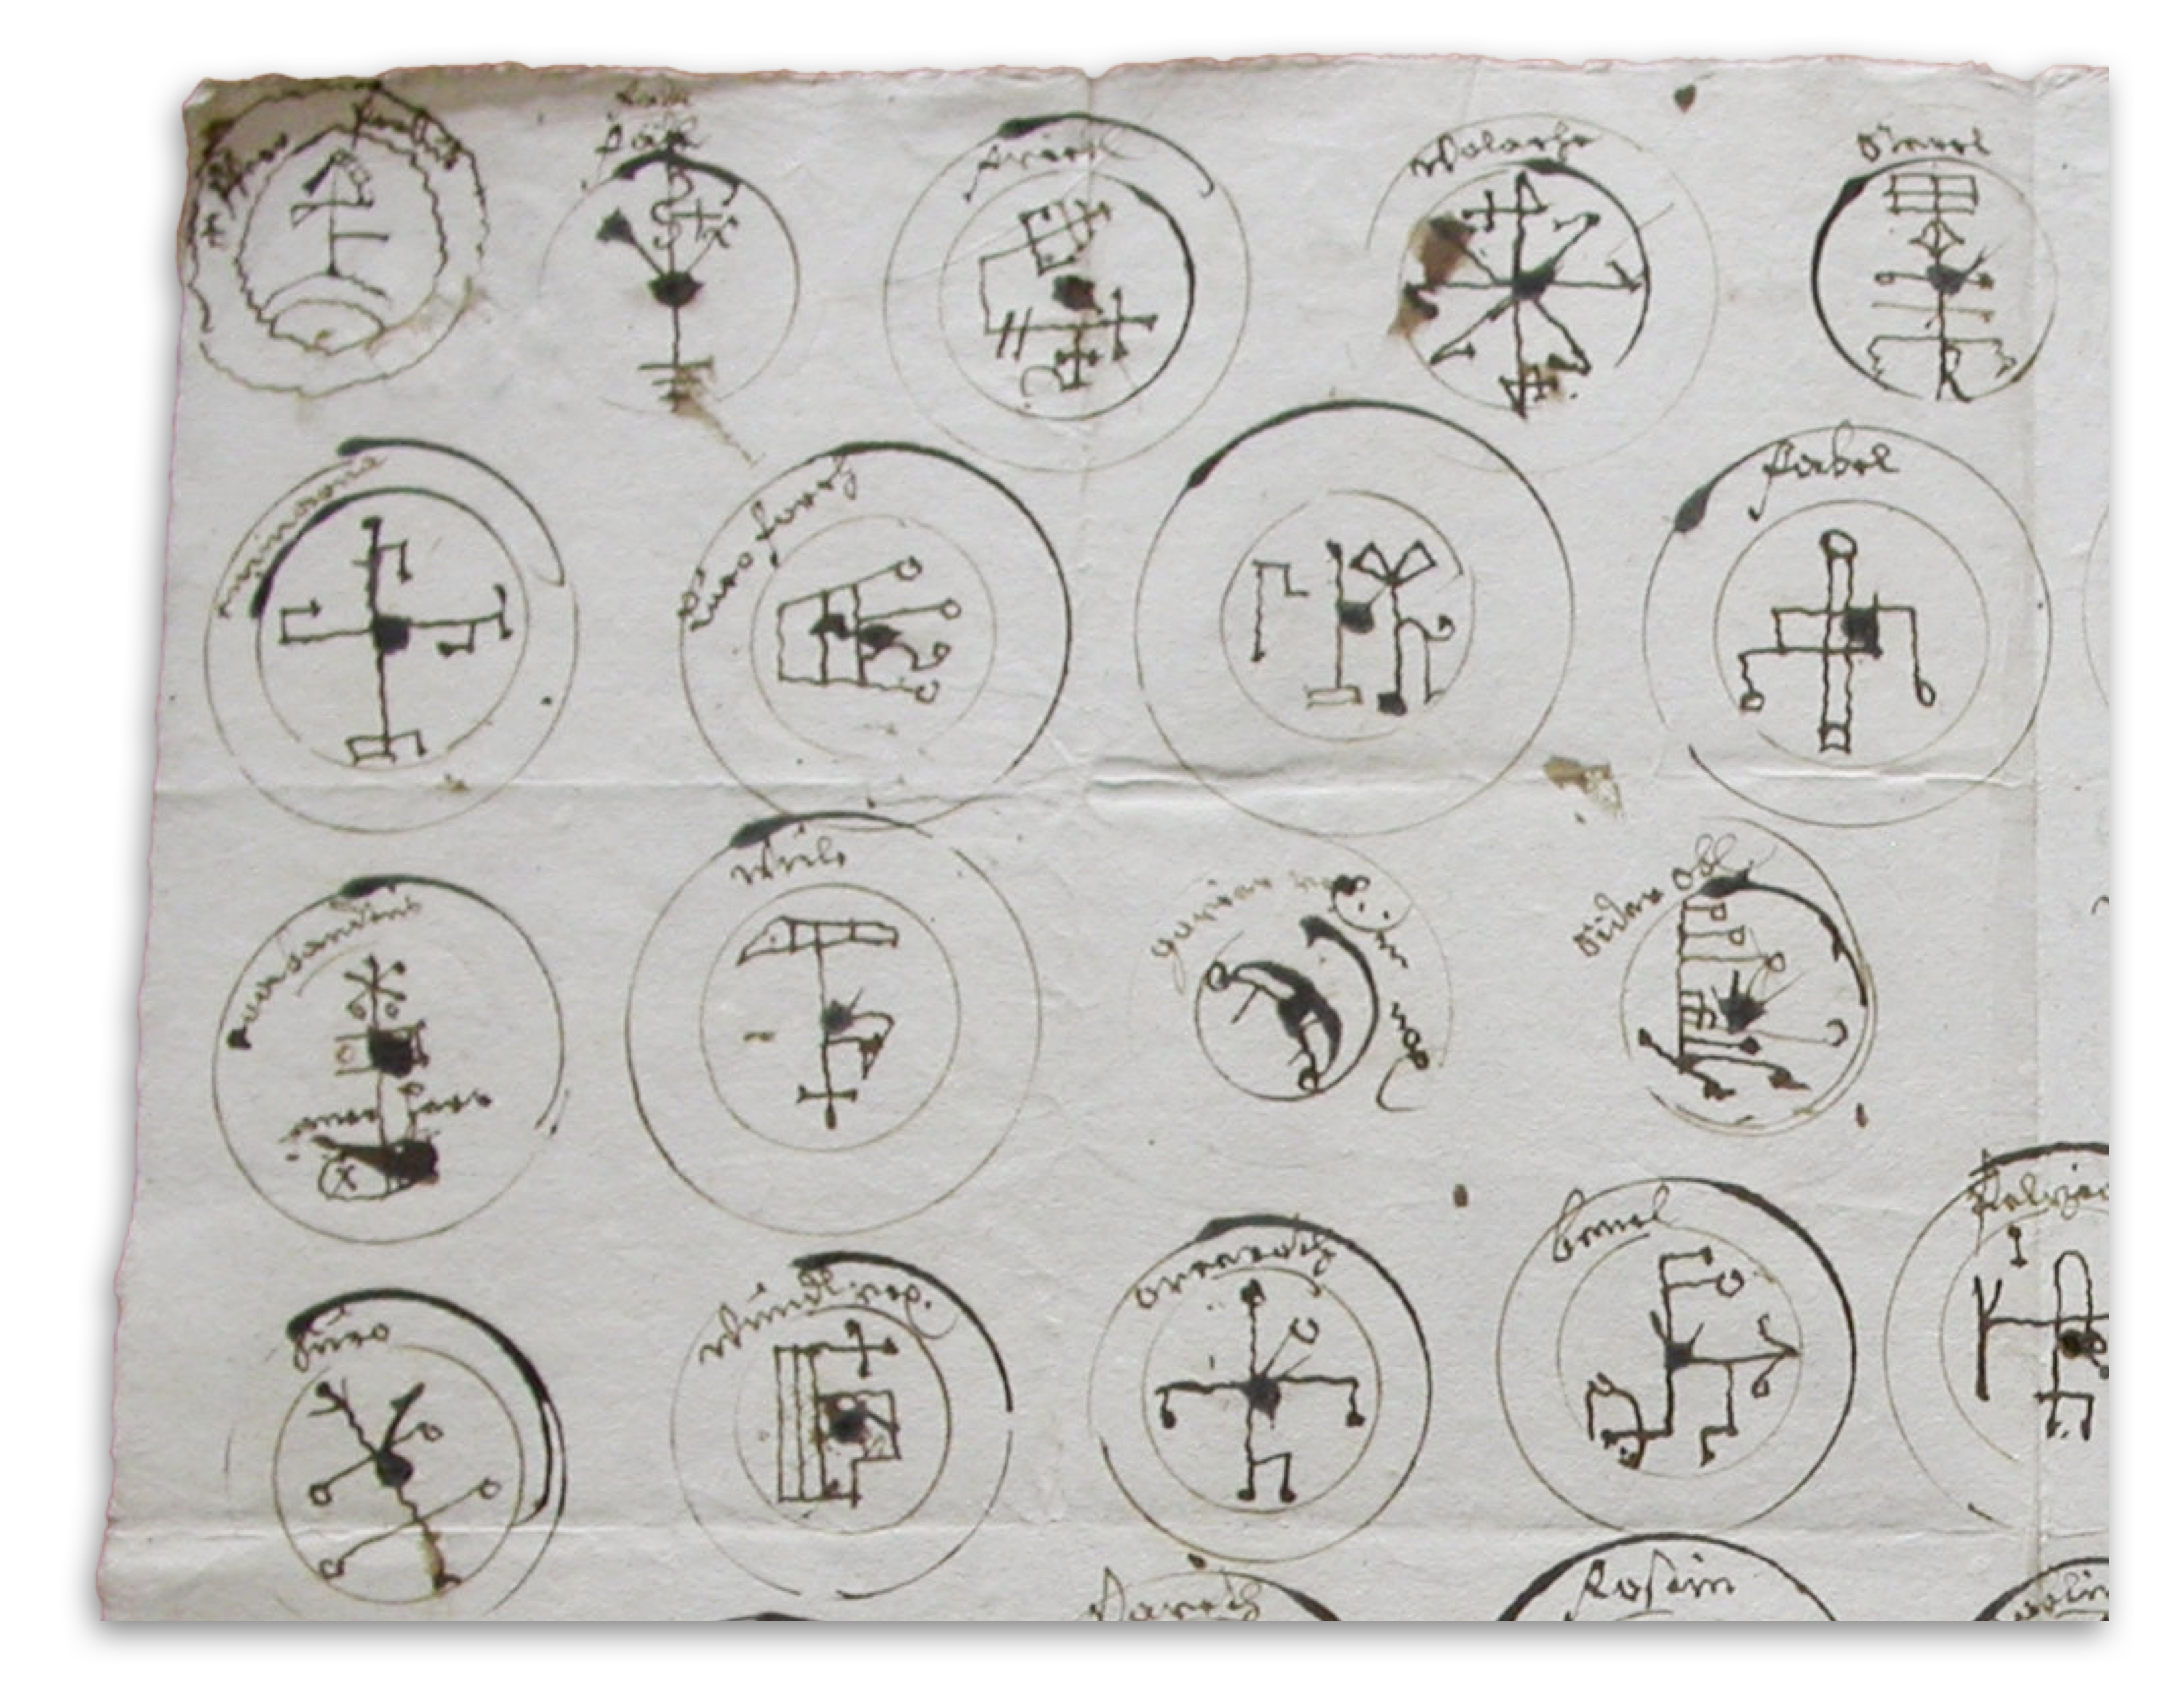 [close up, top left] 72 Devil's Seals from the trial records of Ludwig Perkhofer, 1683